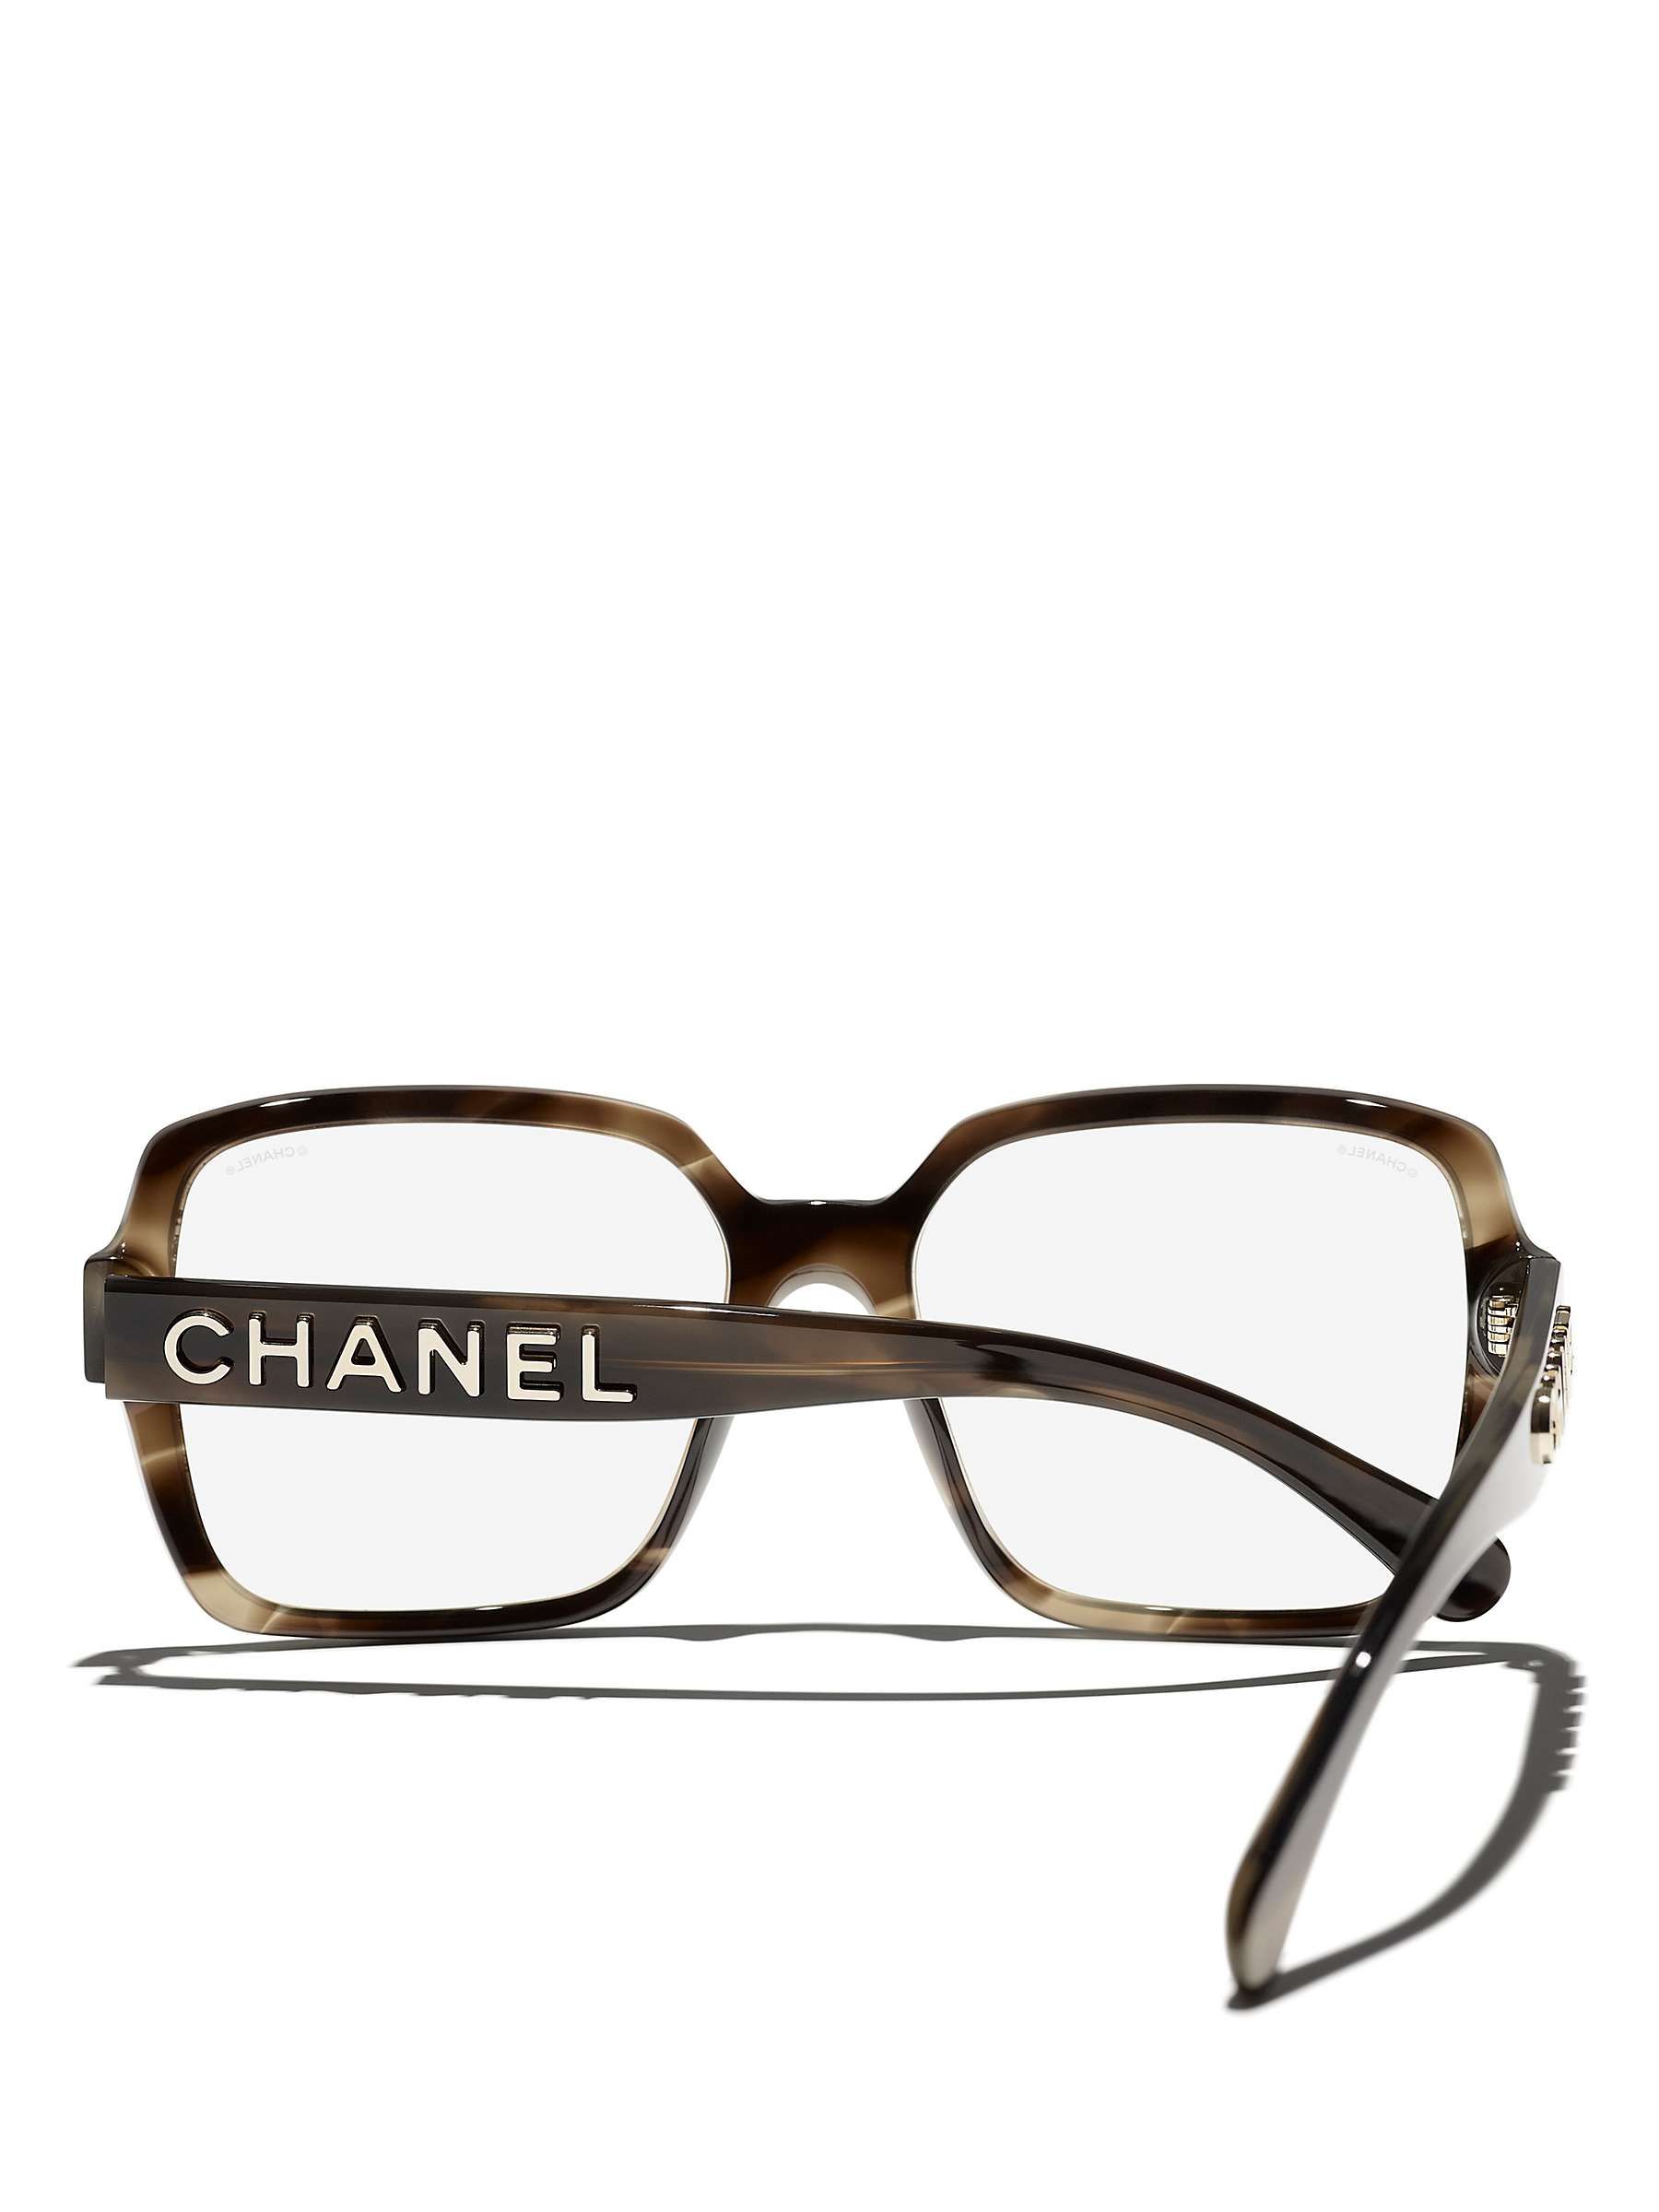 Buy CHANEL Rectangular Sunglasses CH5408 Shiny Tortoise/Clear Online at johnlewis.com